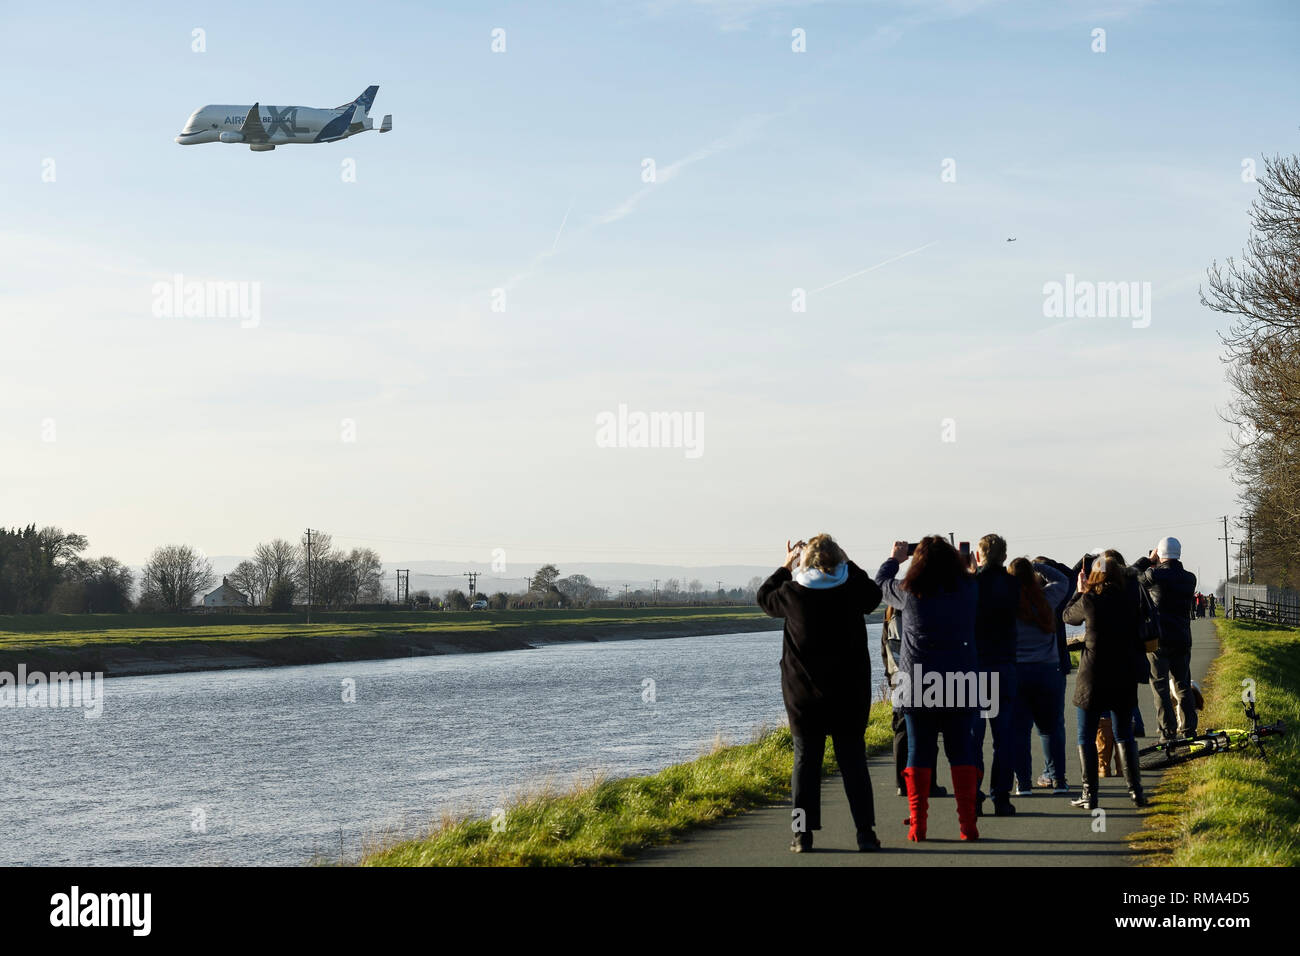 Broughton, Flintshire, UK. 14th February 2019. Crowds watch the new Airbus A330-743L transport plane known as the Airbus Beluga XL do a fly past at Hawarden Airport. The airport is adjacent to the Airbus factory on the outskirts of Chester and this is the first visit of the plane to the factory where it will remain until Saturday. The Beluga XL is designed to transport aircraft wings and has 30% more cargo capacity than the current Beluga. Credit: Andrew Paterson/Alamy Live News Stock Photo